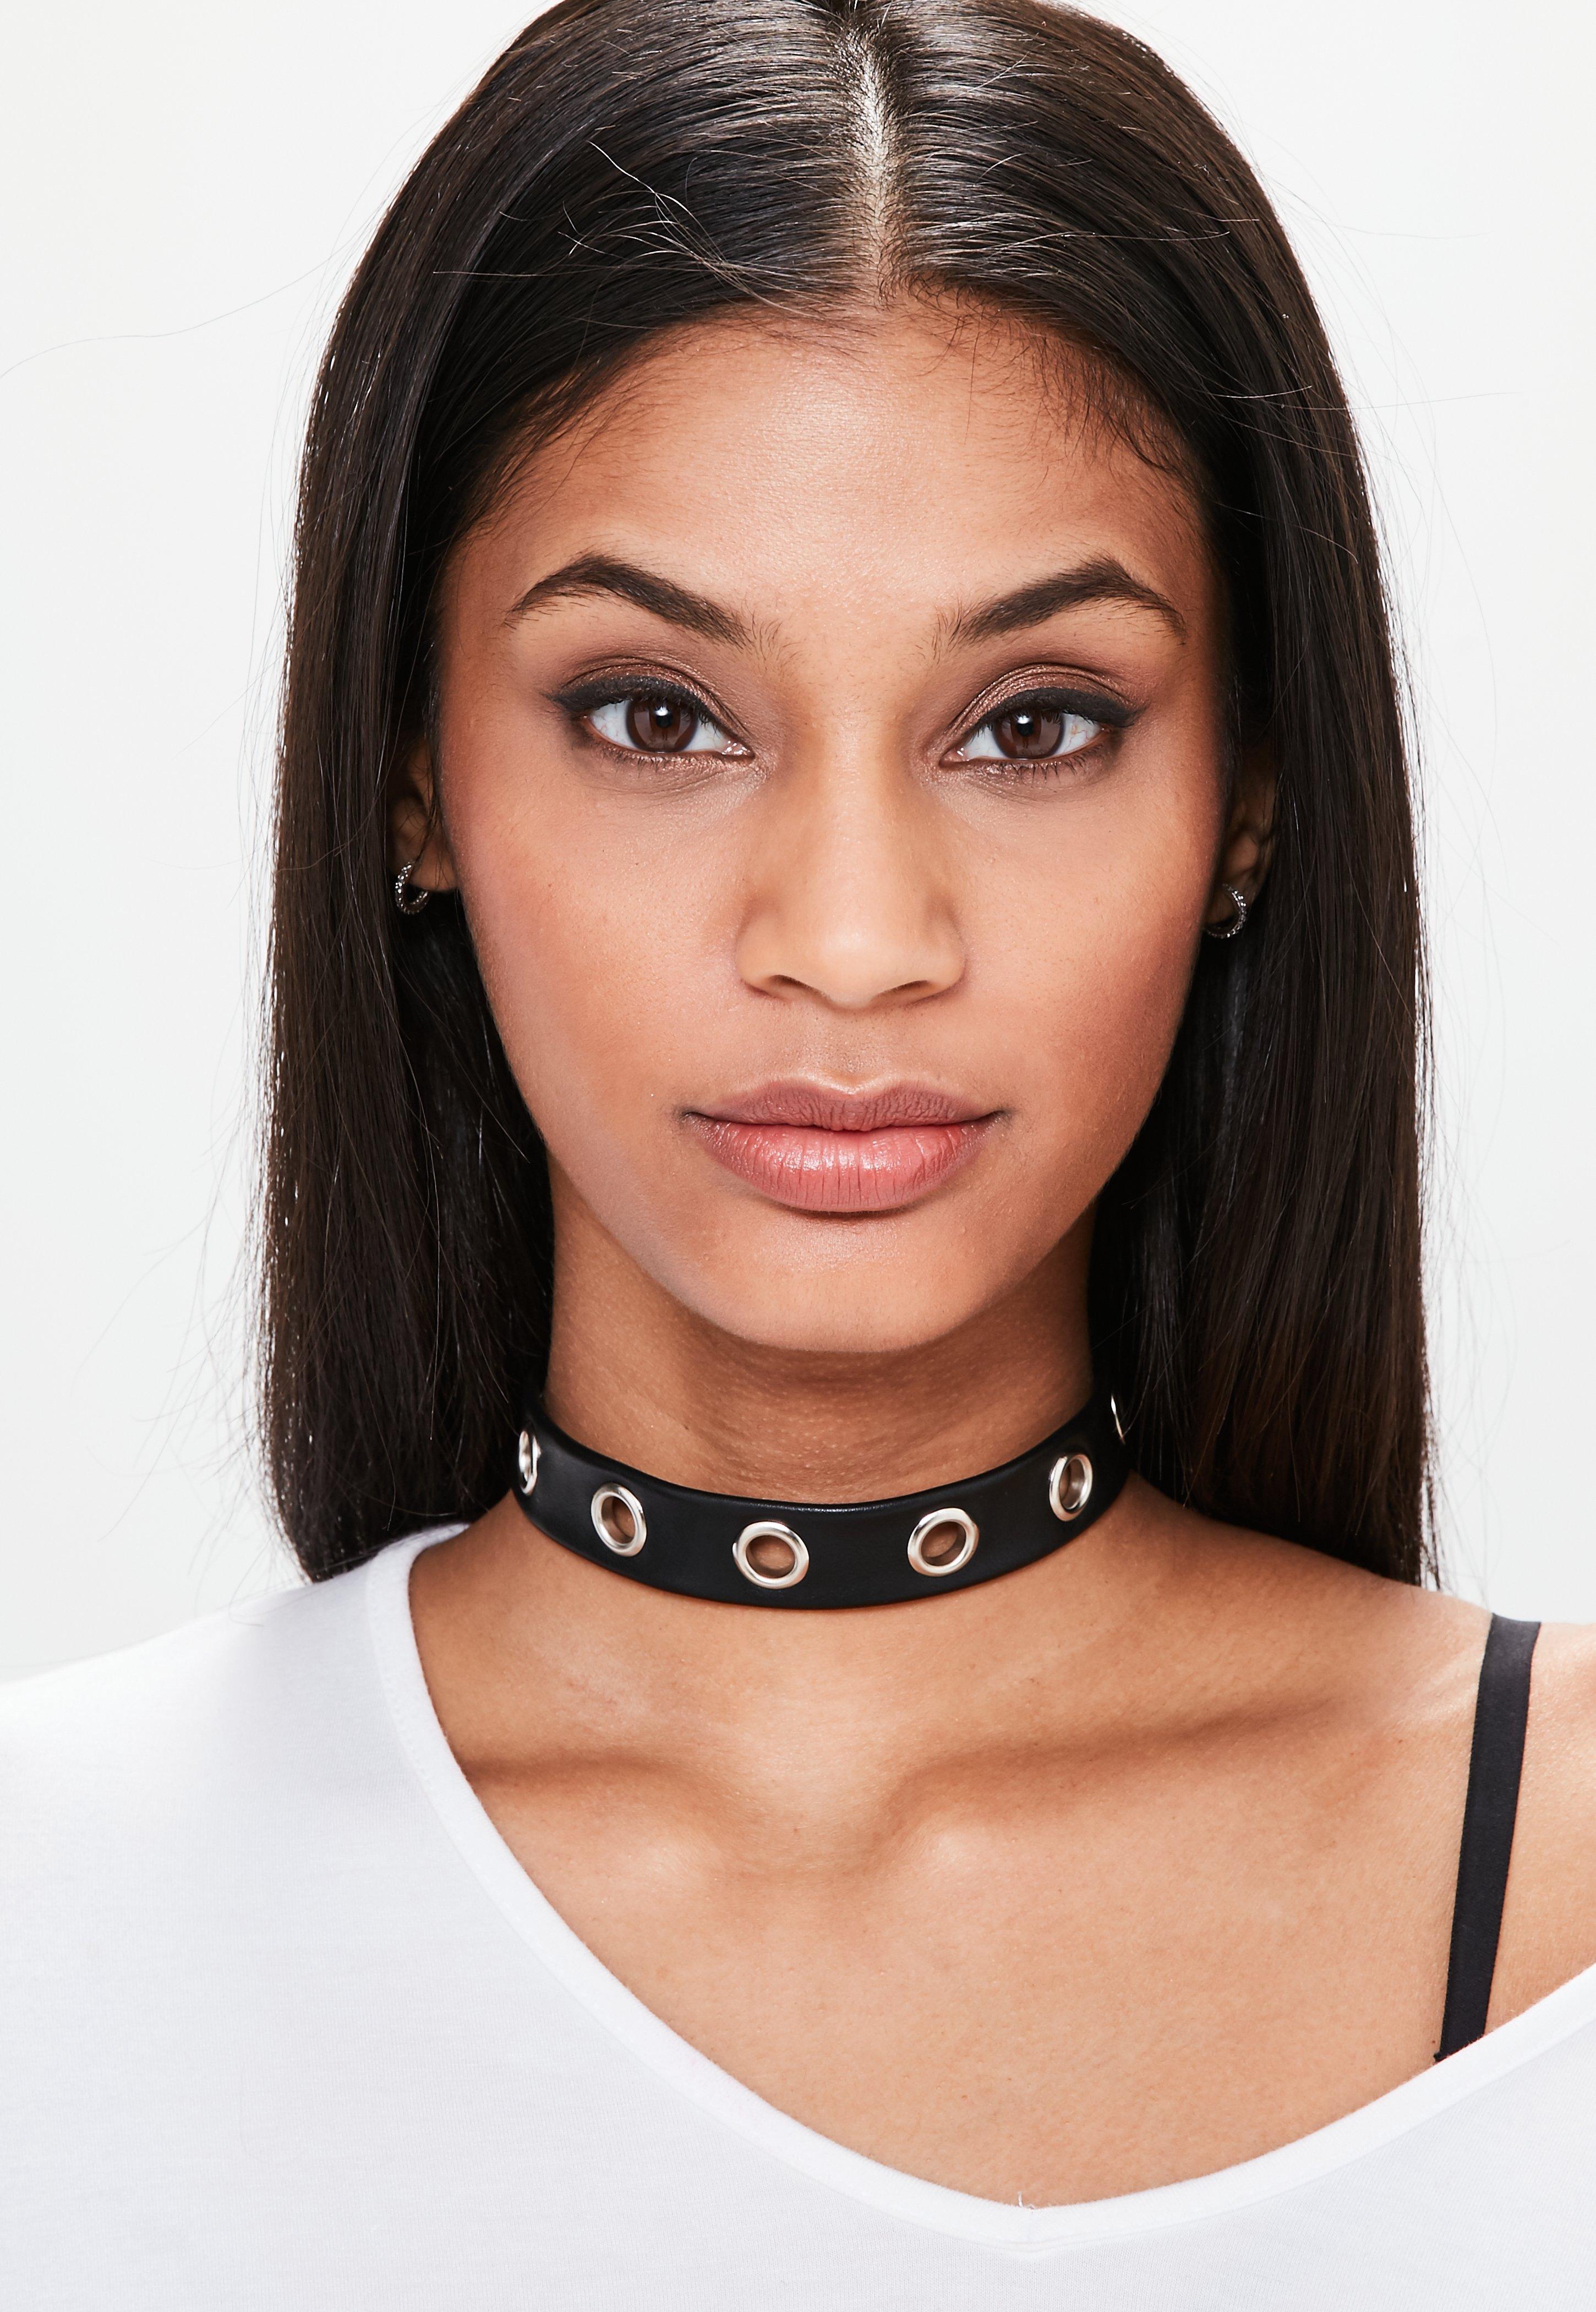 Lyst - Missguided Black Eyelet Trim Choker Necklace in Black